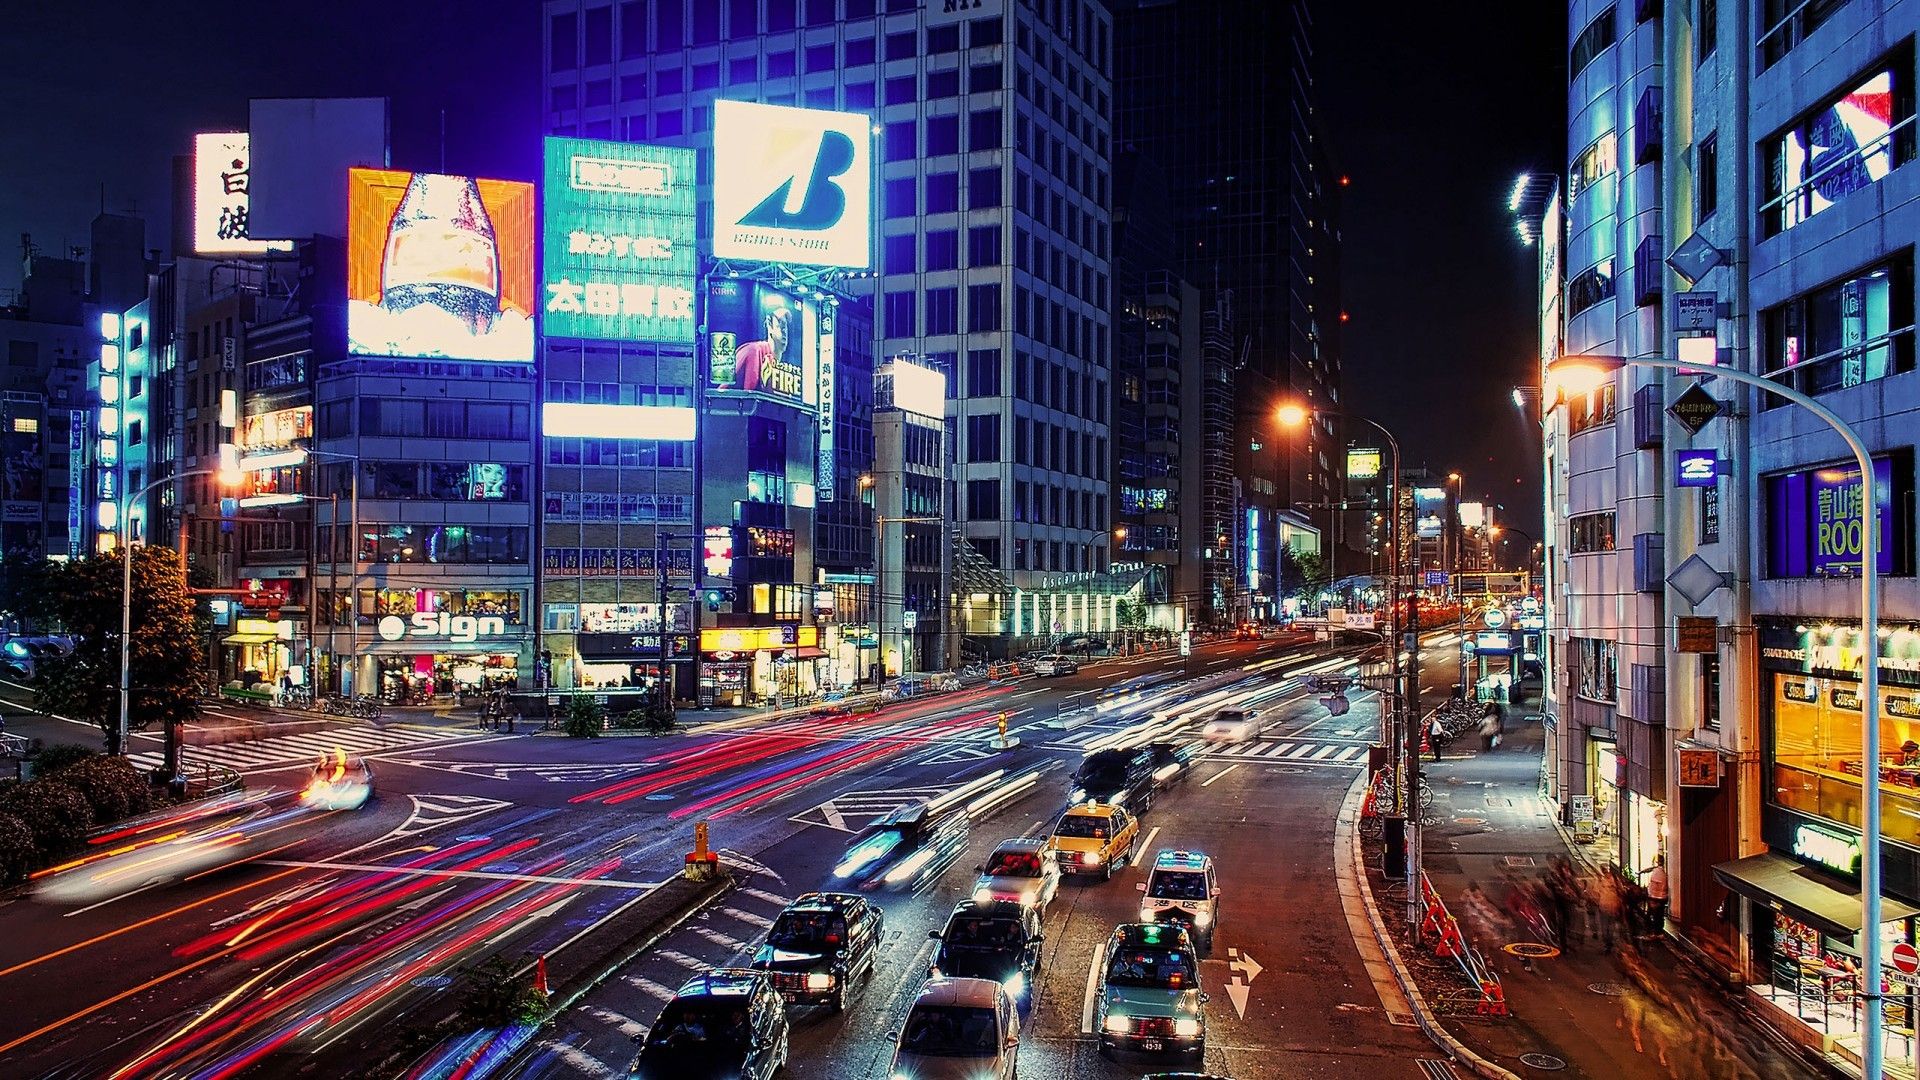 Night traffic in the Japanese city wallpaper and image, picture, photo